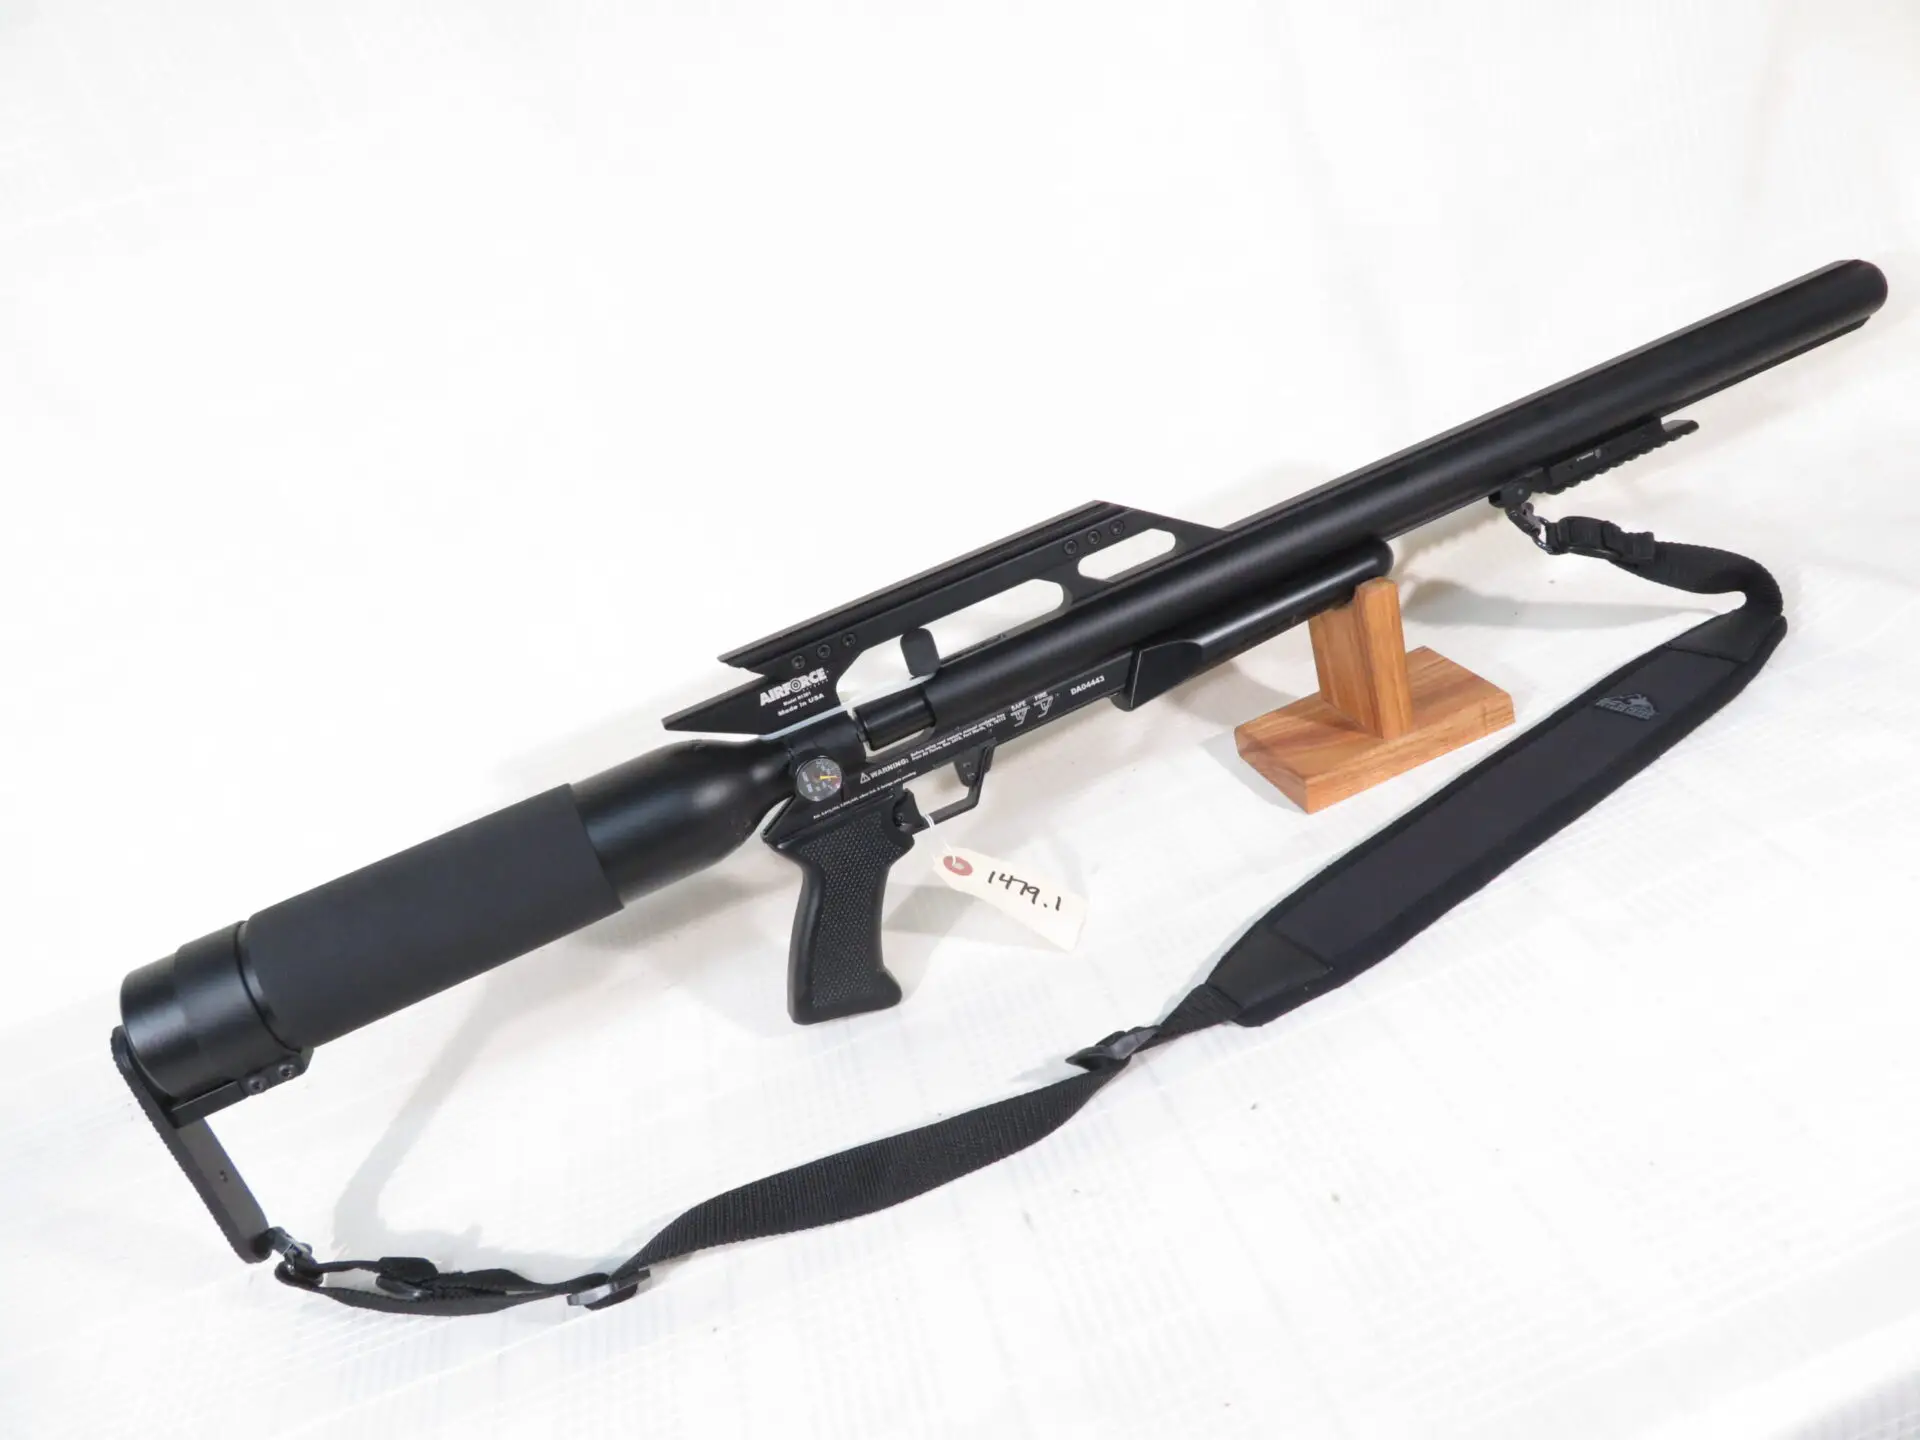 condorss2 Best PCP air rifles - 15 of the best PCP guns you can buy right now (Reviews and Buying Guide 2022)